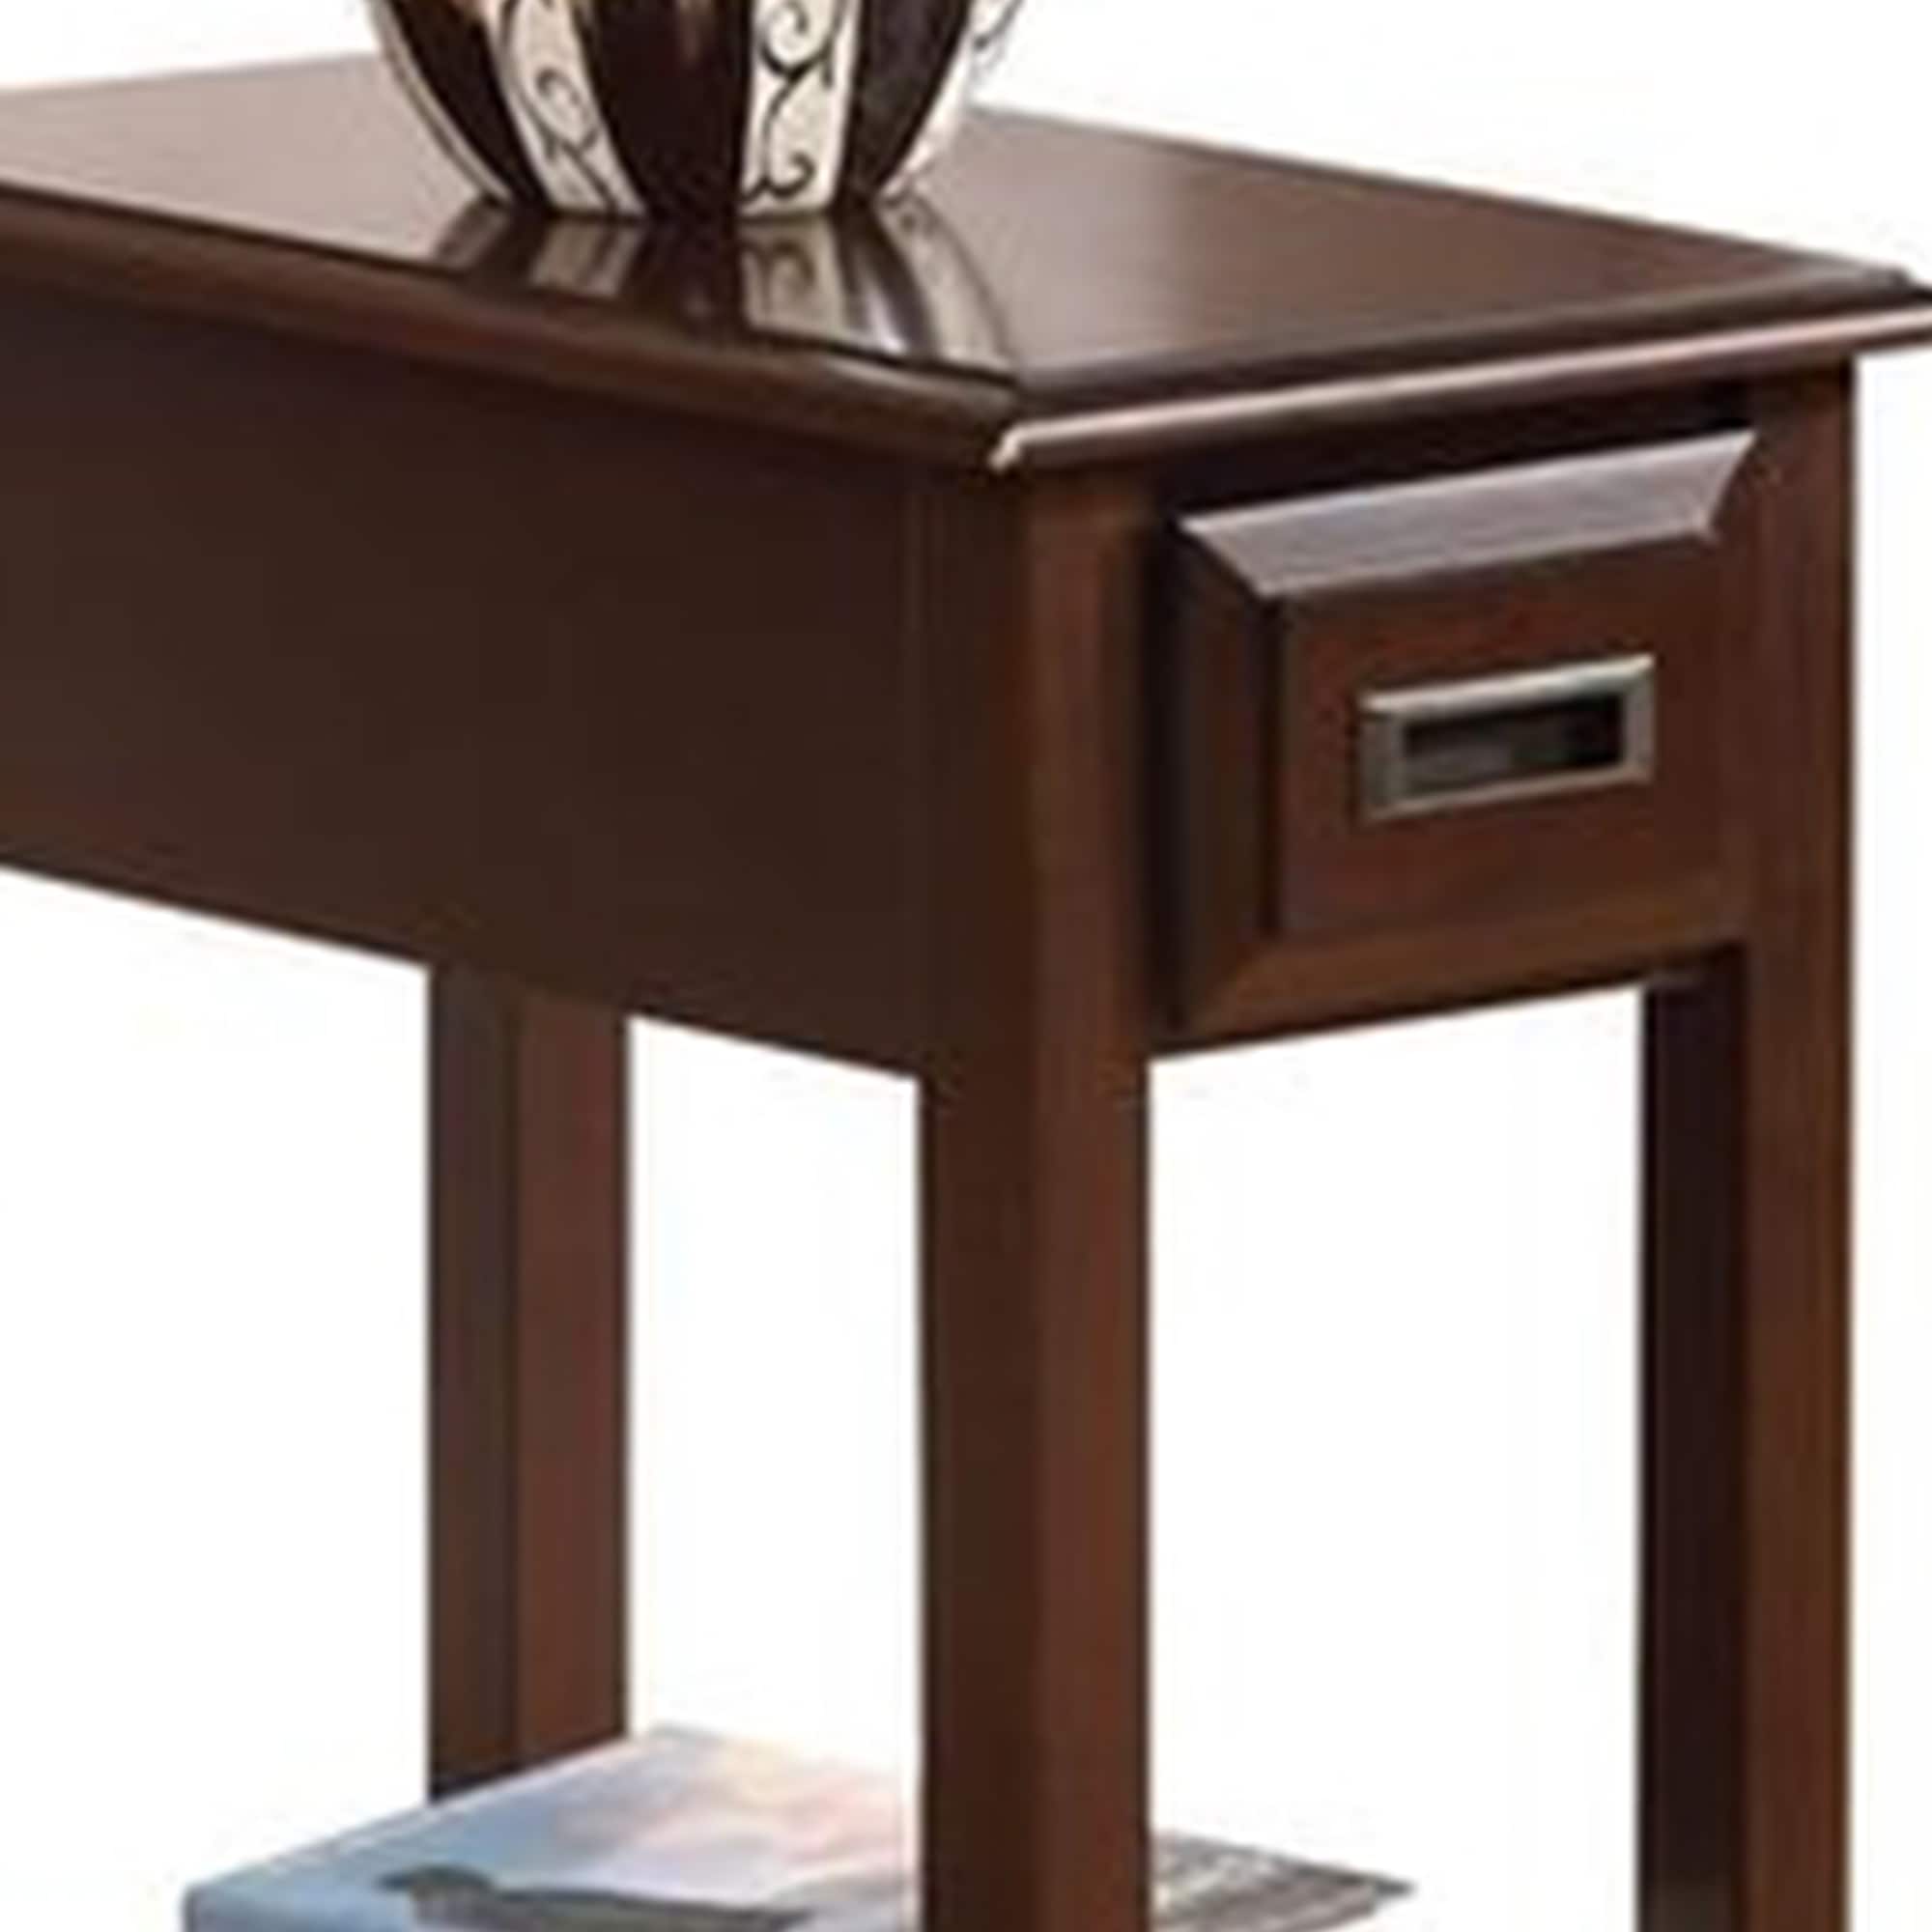 Benzara 22 In W X 23 In H Dark Brown Wood Modern End Table With Storage Assembly Required At